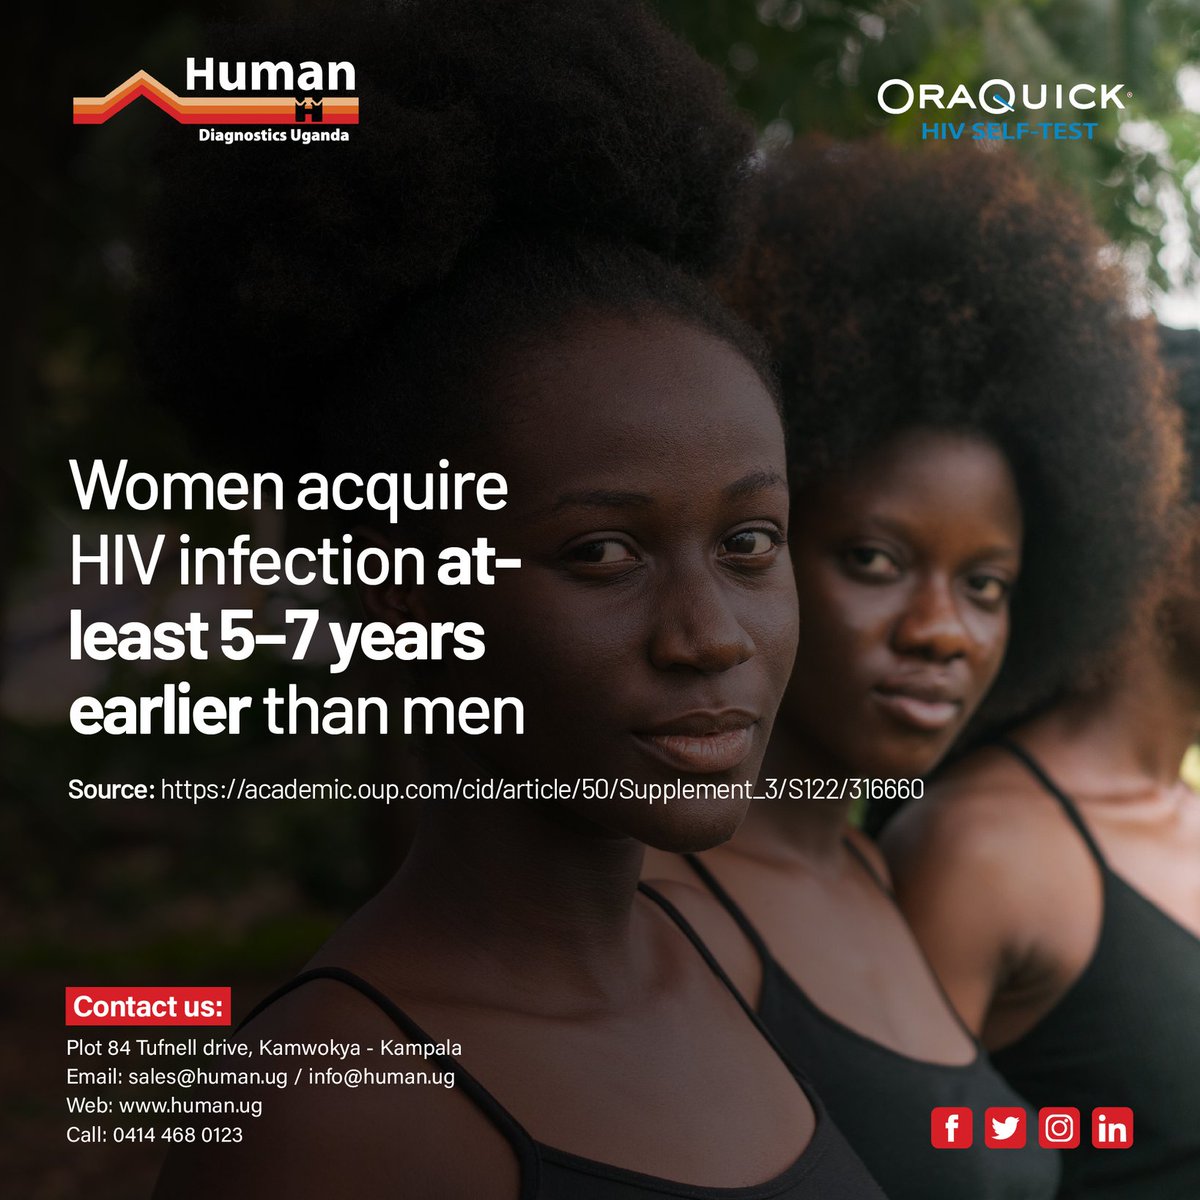 WomanUp! Guard your health with #OraQuickHIVSelfTest